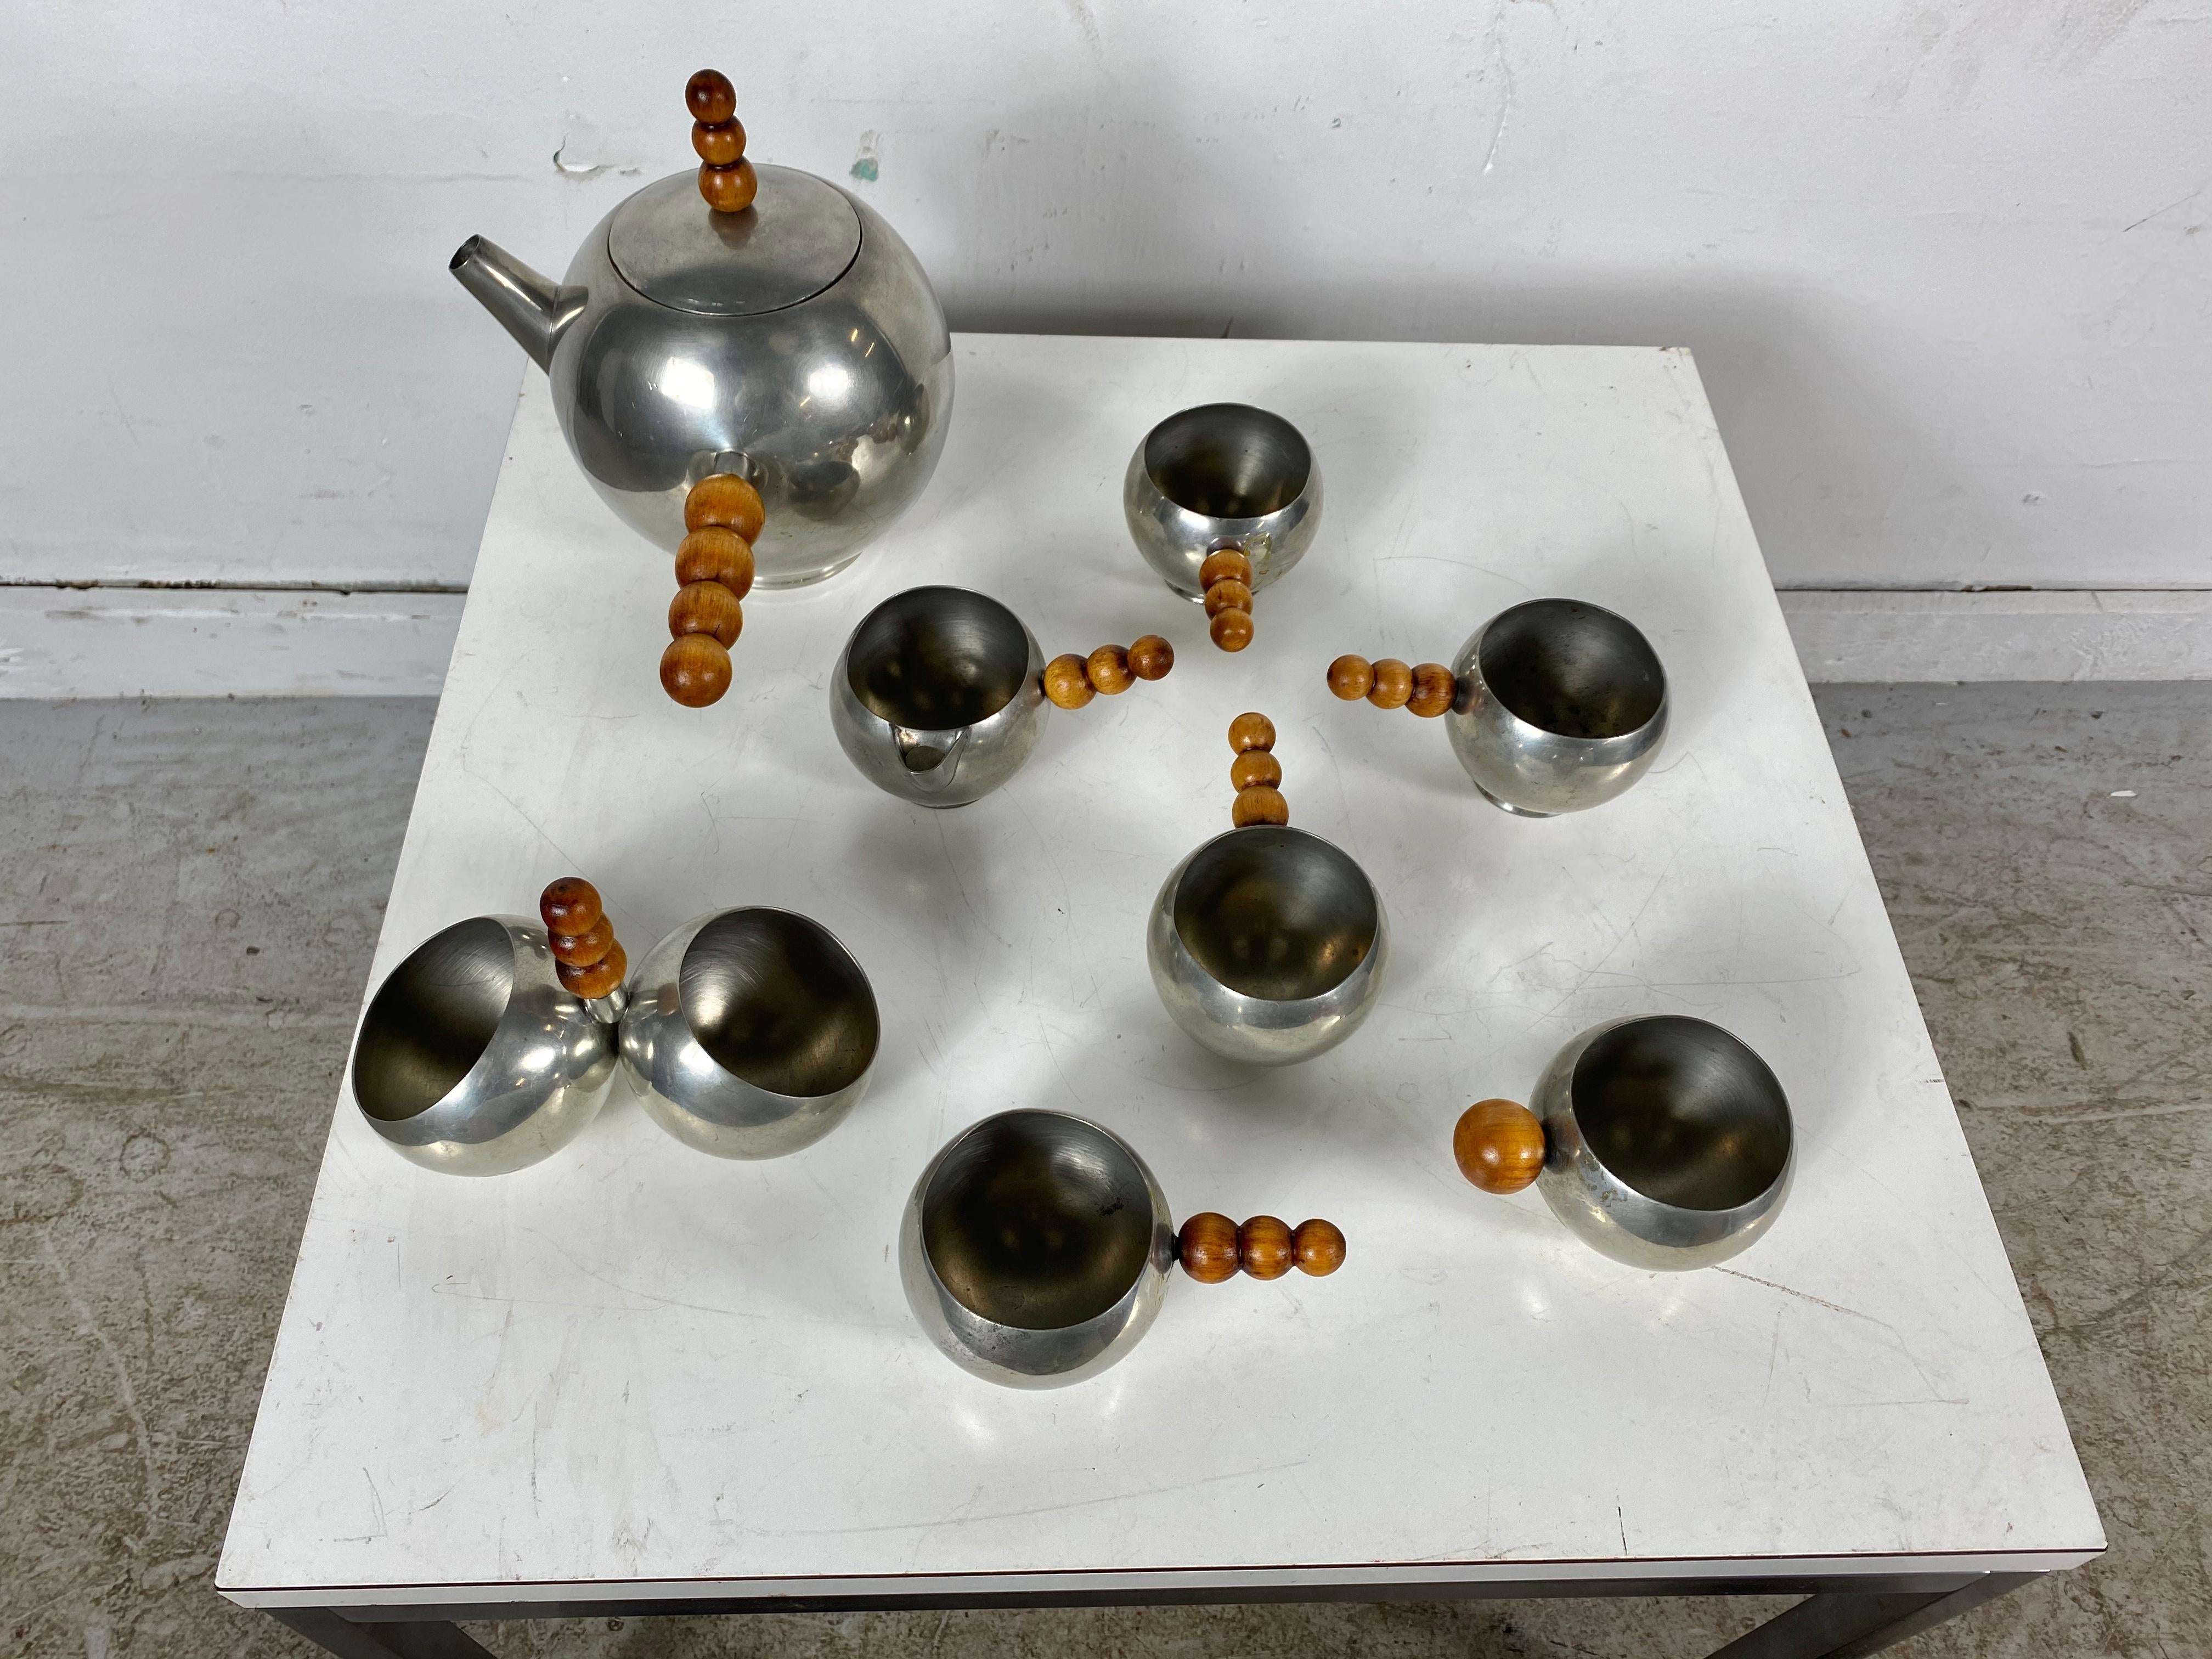 Unusual Art Deco, Modernist 8-Piece Tea Set, Chrome or Wood Ball Design In Good Condition For Sale In Buffalo, NY